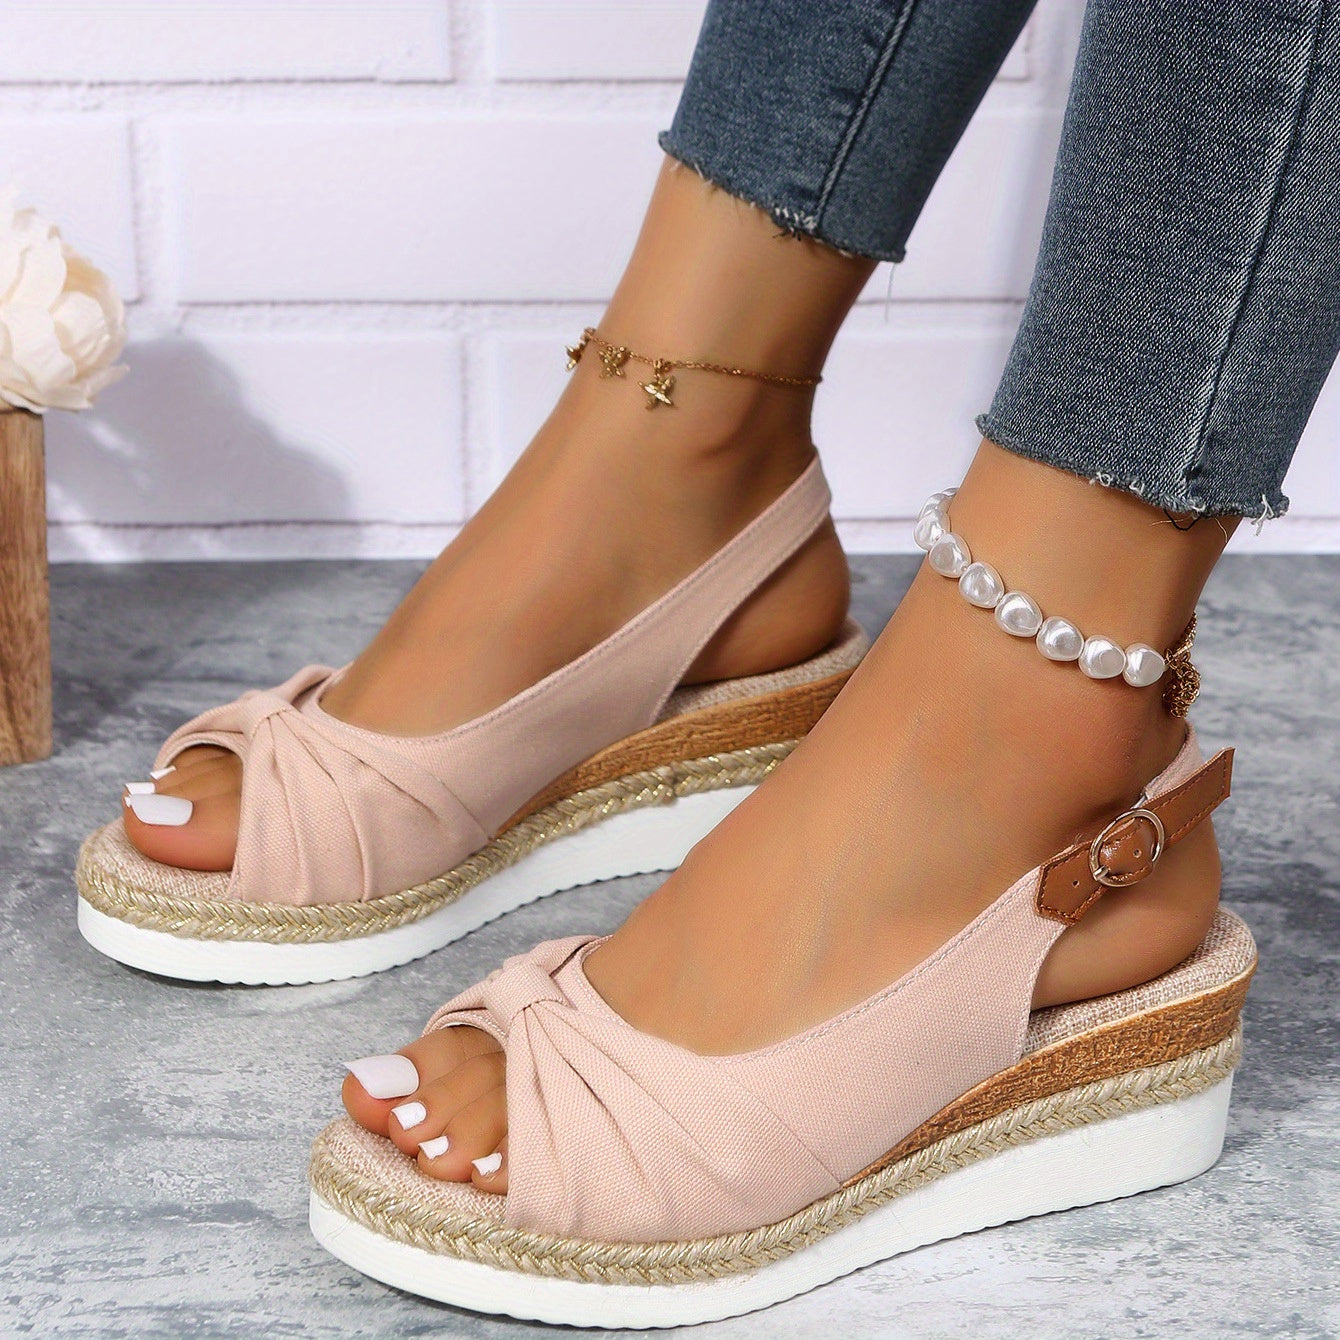 Peep Toe Slingback Wedge Sandals with Ankle Buckle Strap for Women